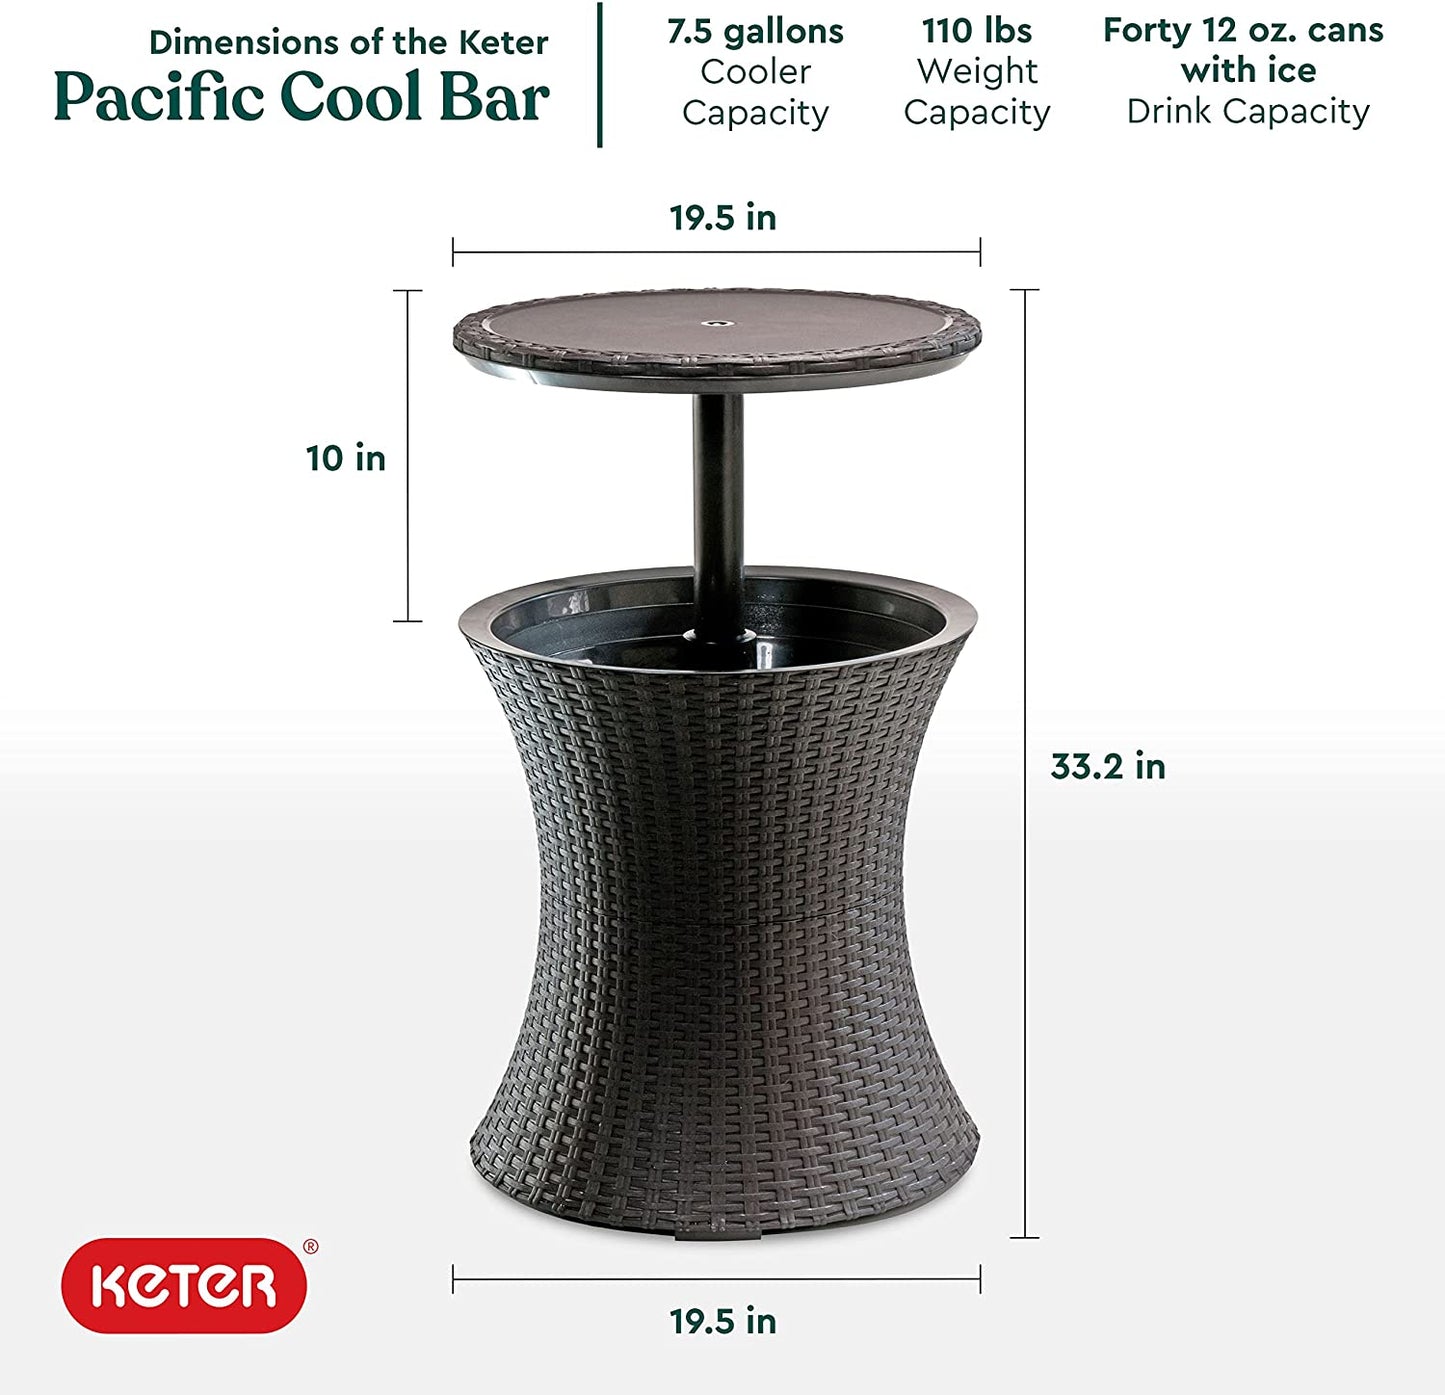 Keter Pacific Cool Bar Outdoor Patio Furniture and Hot Tub Side Table with 7.5 Gallon Beer and Wine Cooler, Brown